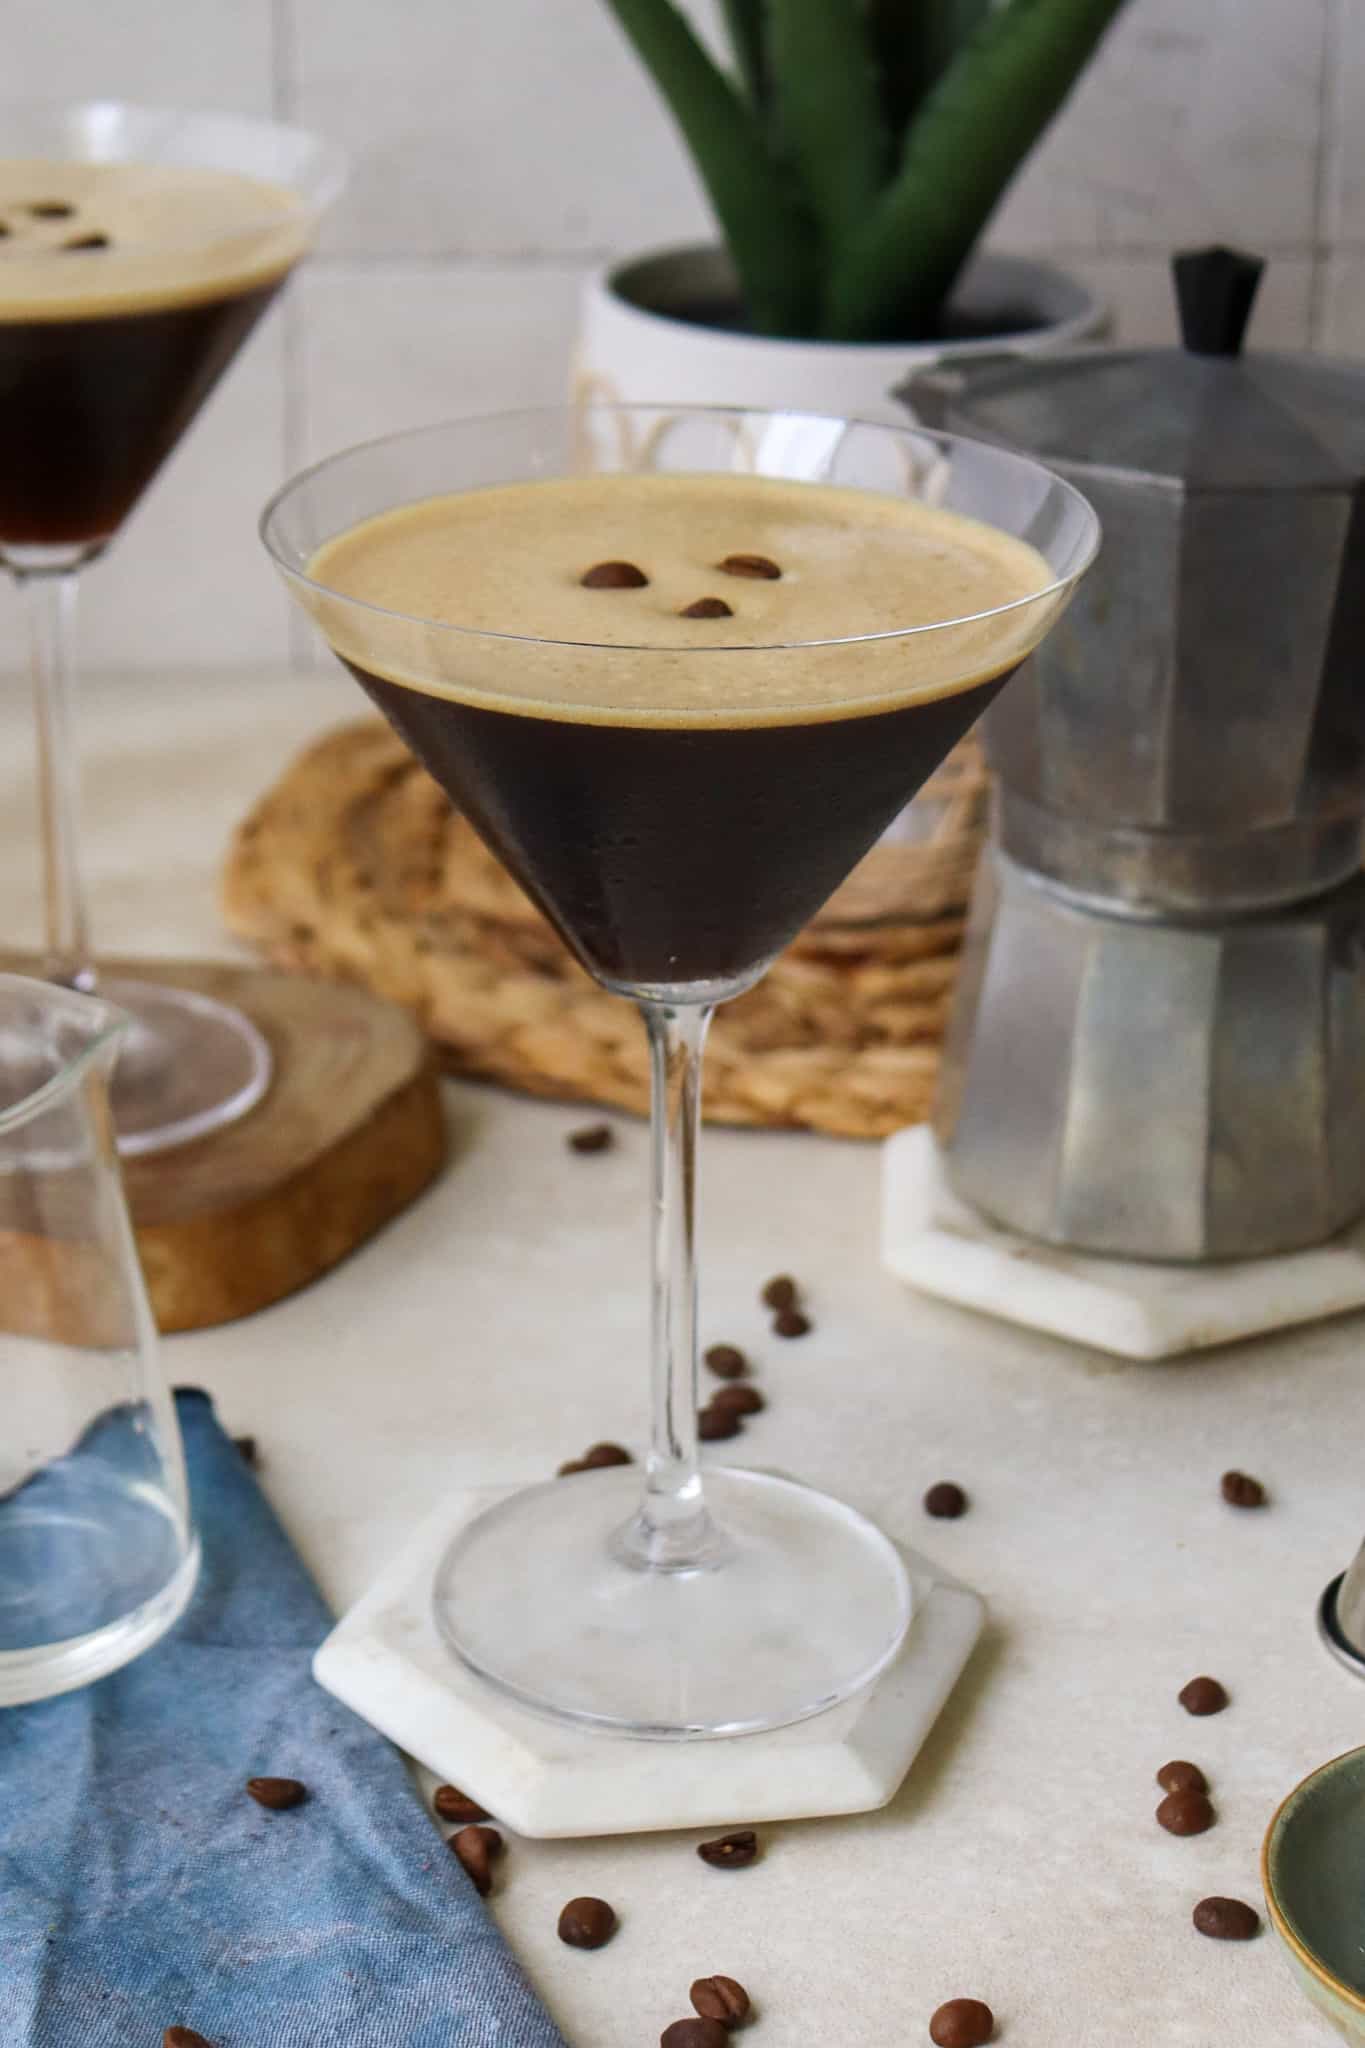 Cuban Espresso Martini in a martini glass placed on a hexagonal shaped coaster, placed on a white surface surrounded by coffee beans, an Italian espresso maker, another glass of the same martini and a blue tea towel.